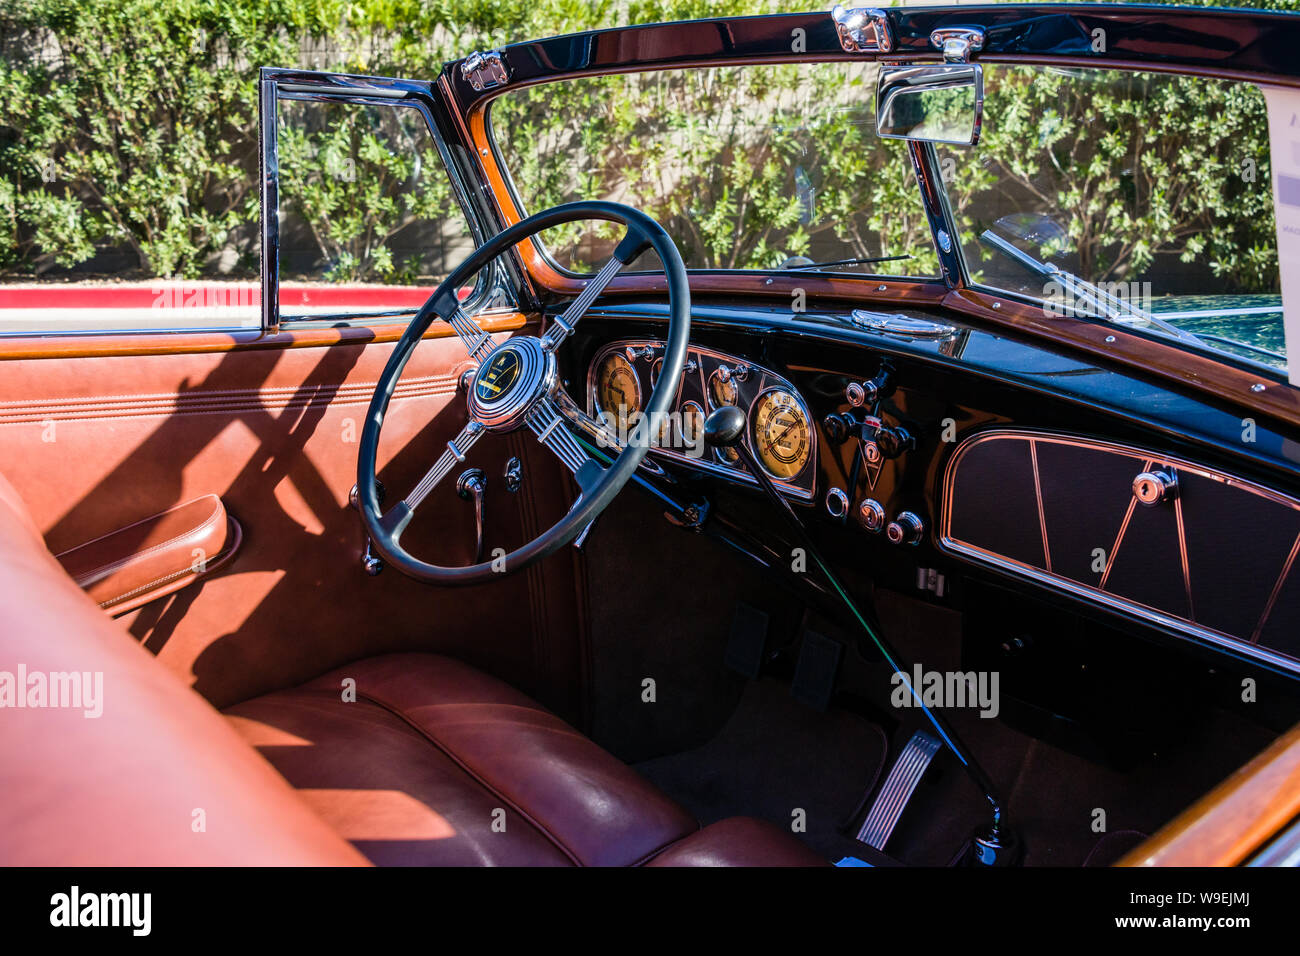 RM Sotheby's (ex RM Auctions) 1934 Cadillac V-16 convertibili Foto Stock